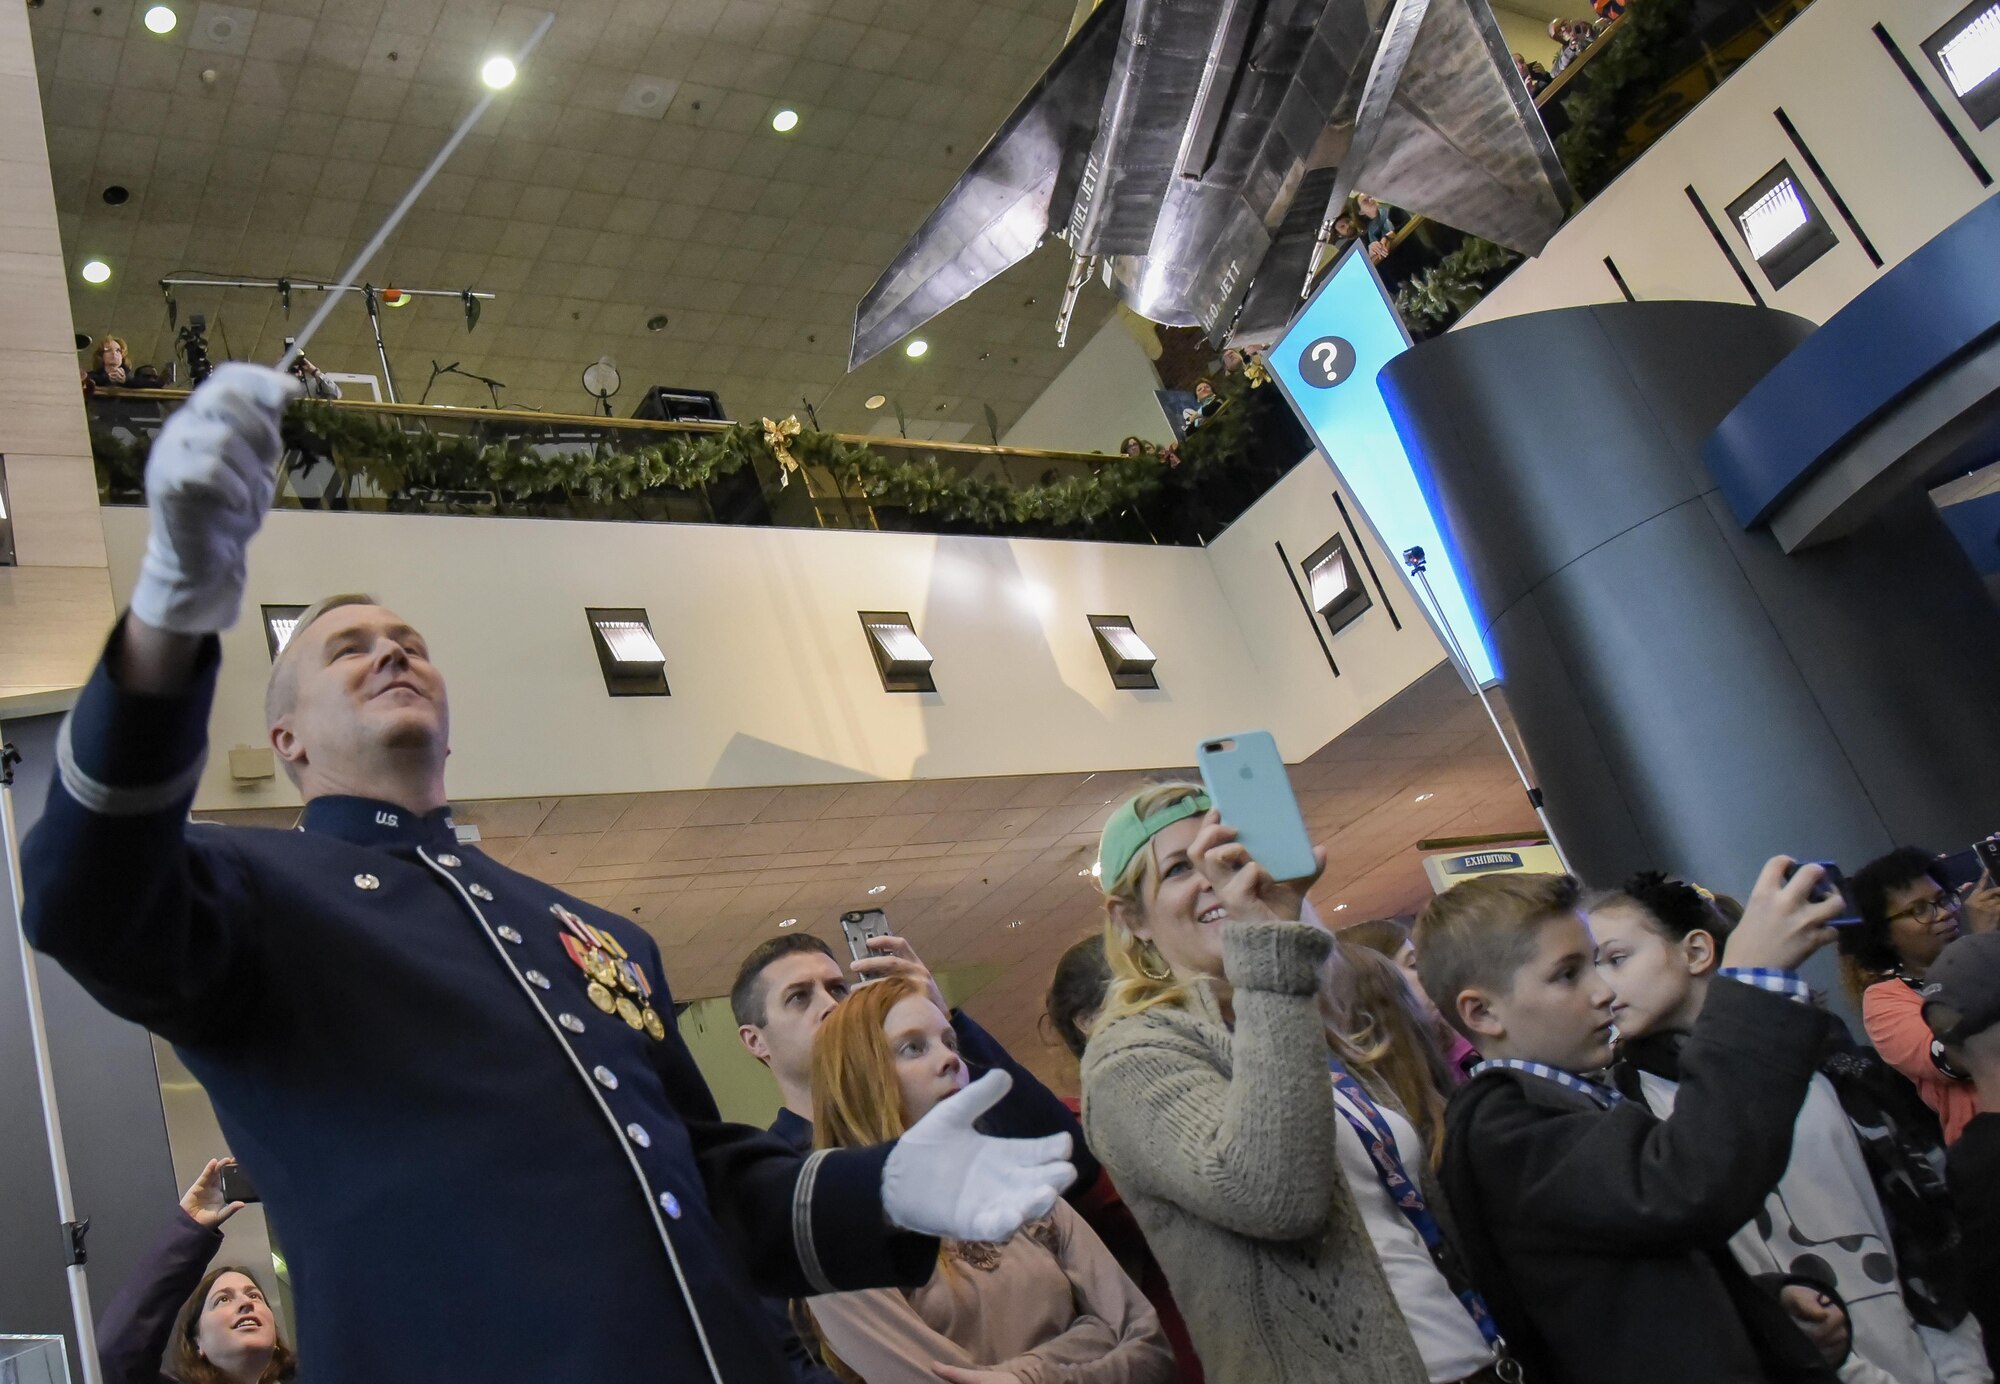 U.S. Air Force Band Commander Col. Larry H. Lang conducts the band's annual holiday flash mob performance at the Smithsonian National Air and Space Museum in Washington, D.C., Nov. 29, 2016. (U.S. Air Force photo by Jim Varhegyi)(released)